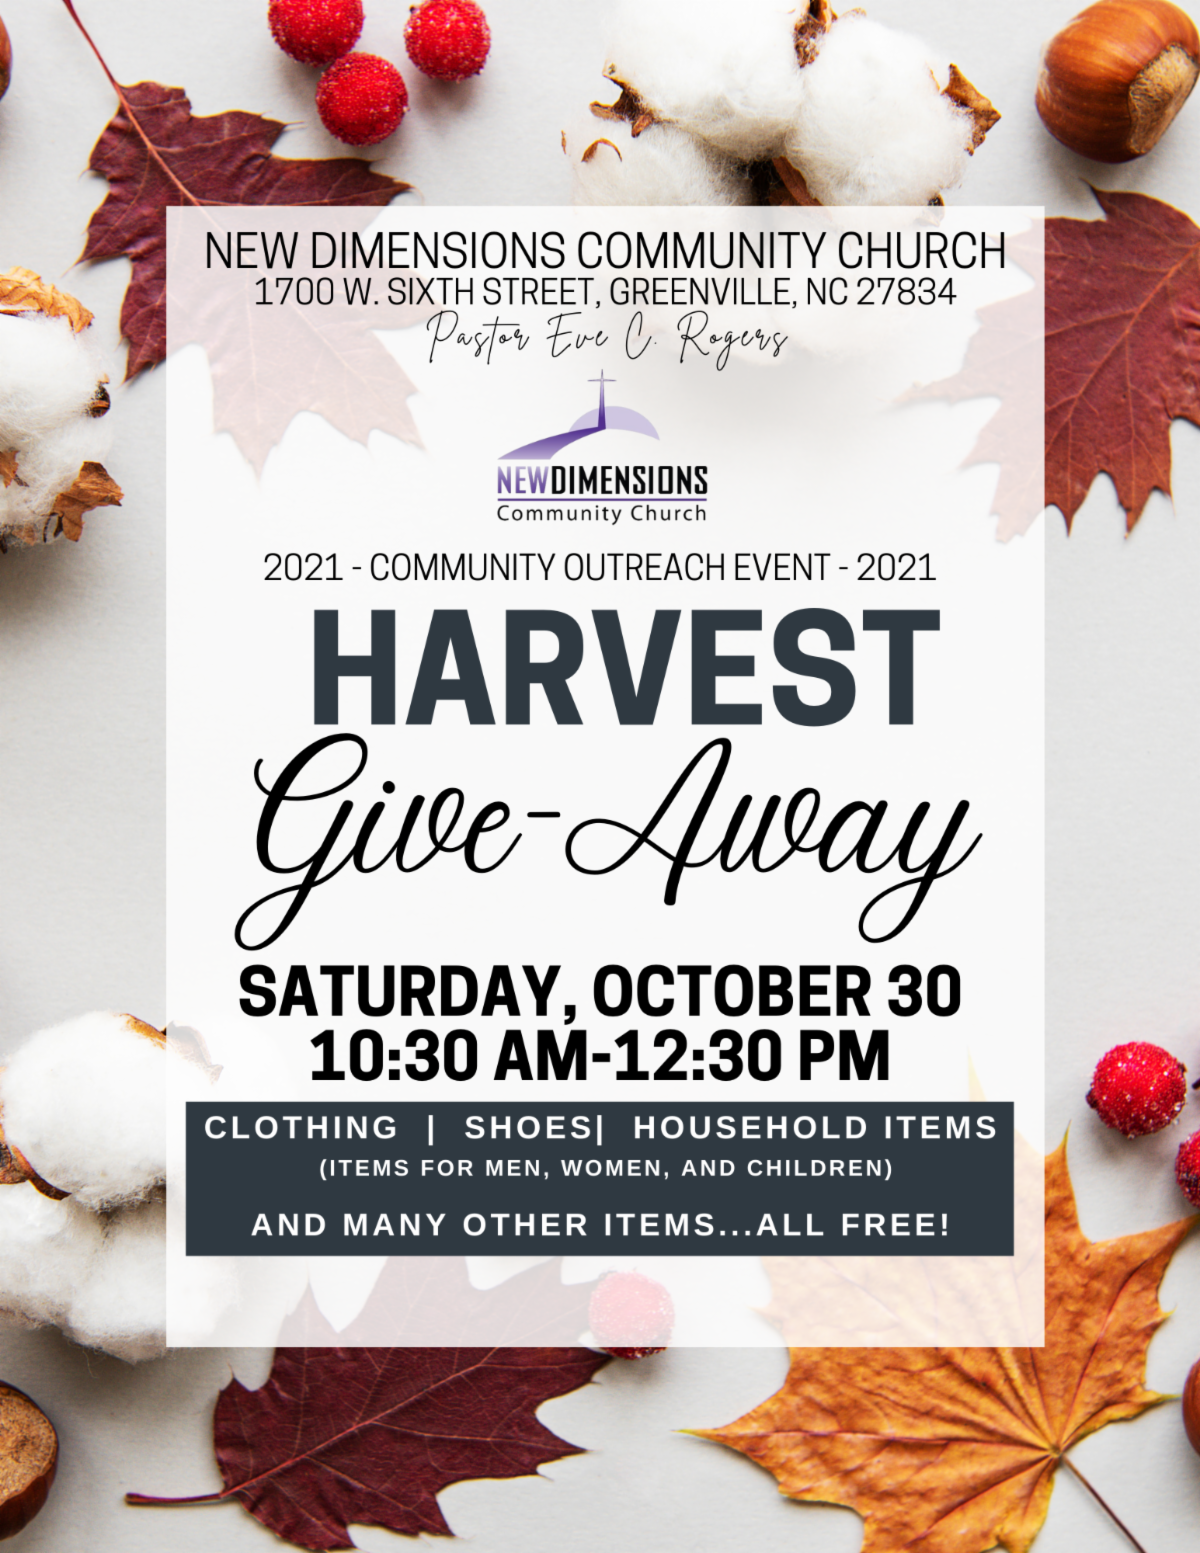 Harvest Give-Away – New Dimensions Community Church